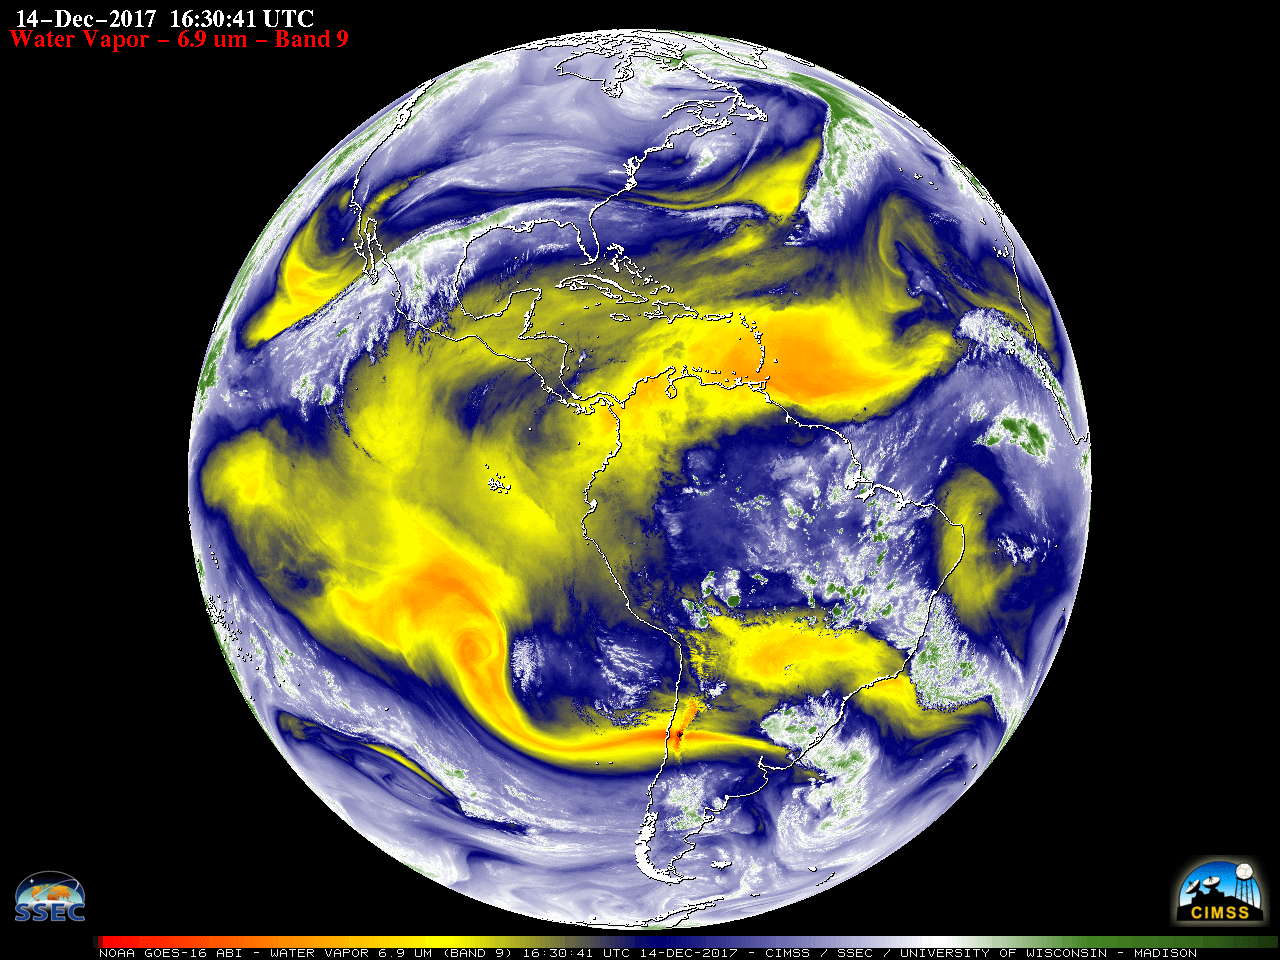 GOES-16 Full-Disk Mid-level Water Vapor image [click to enlarge]